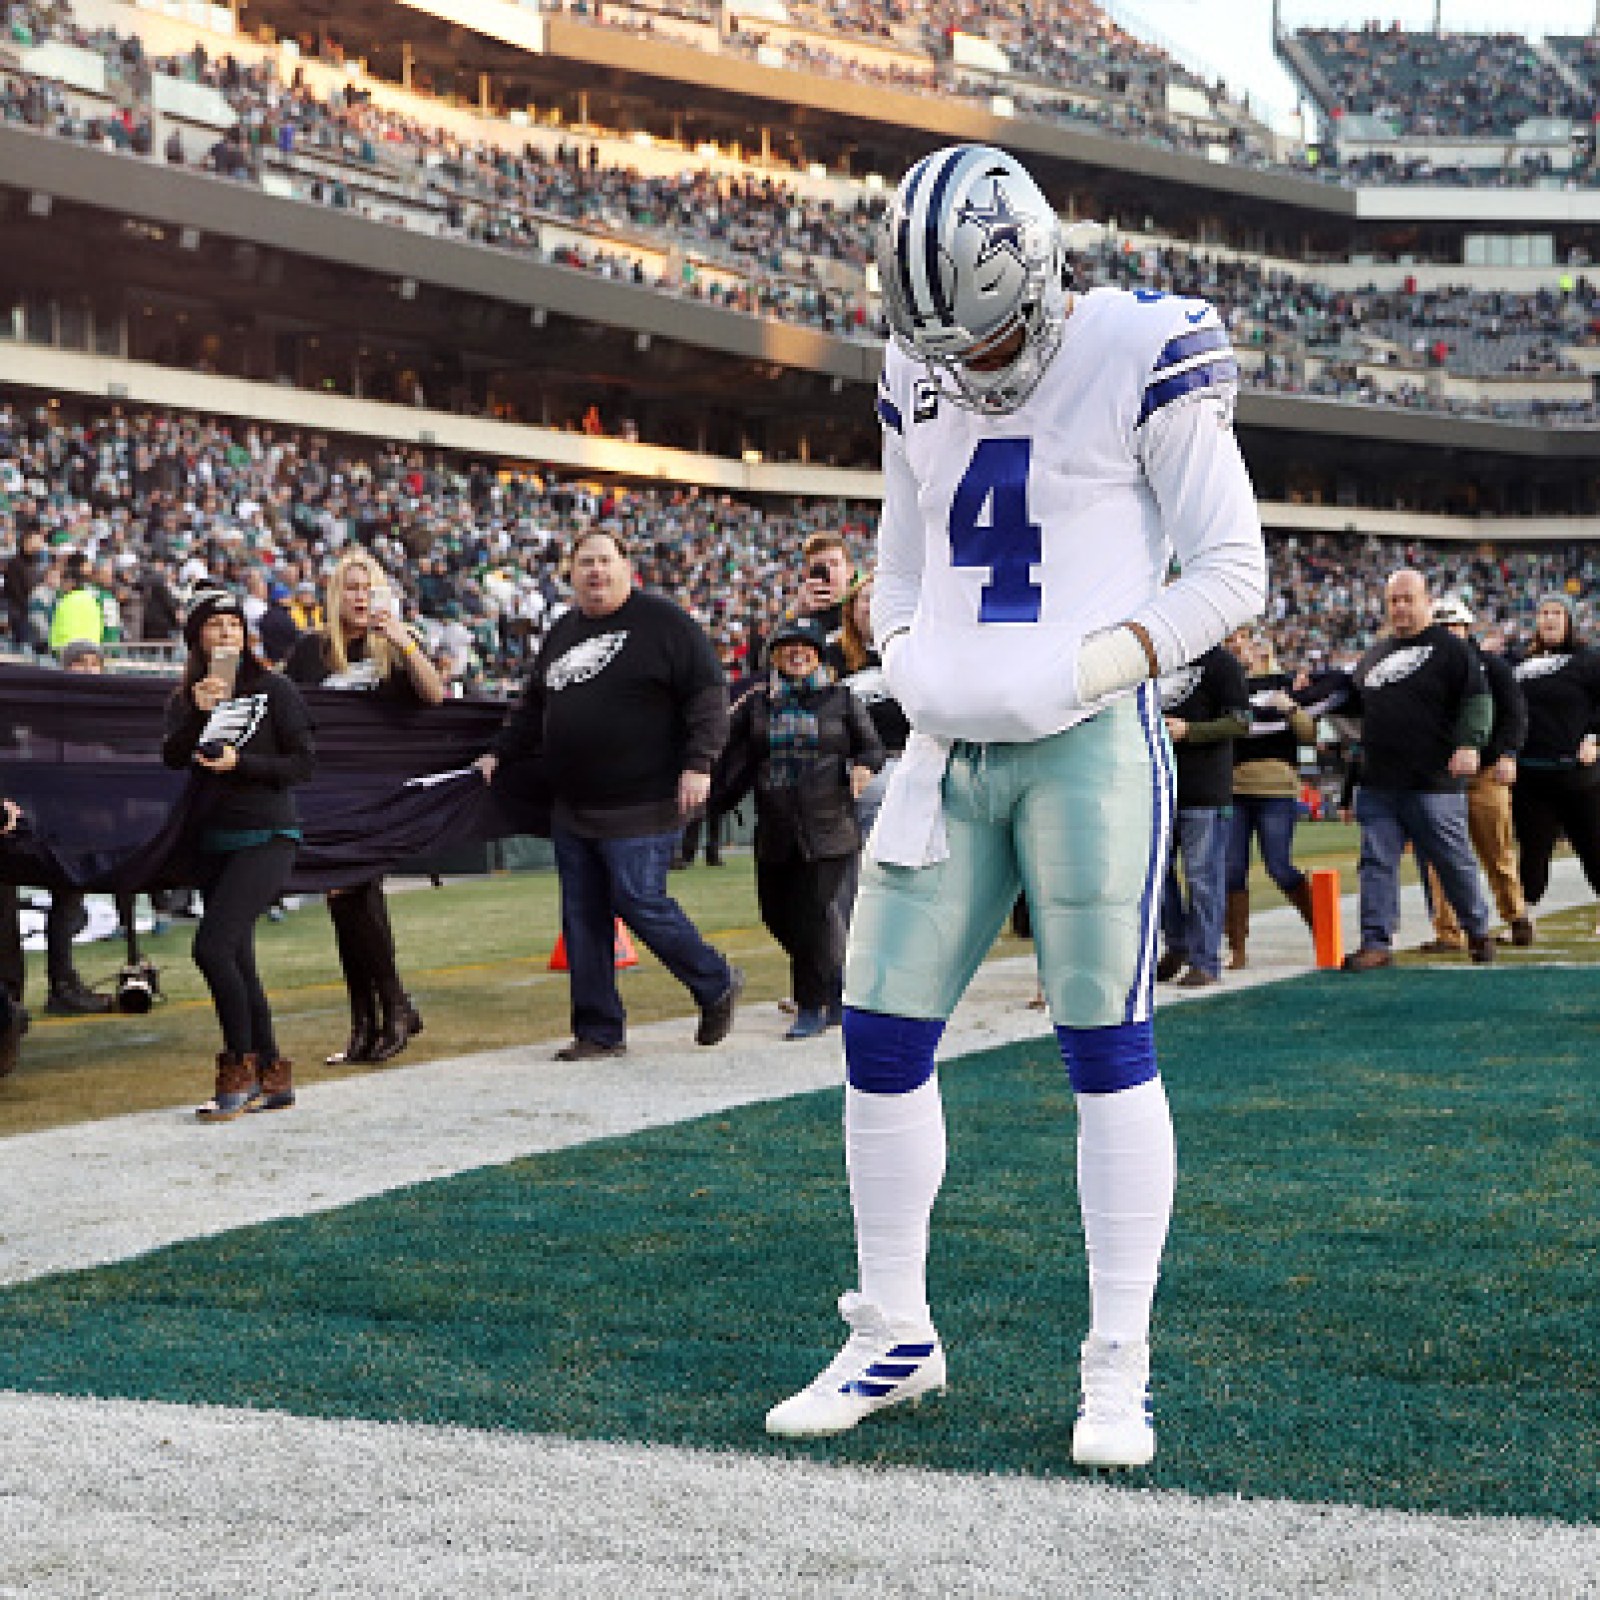 Cowboys playoff picture: Dallas clinches berth after Giants win